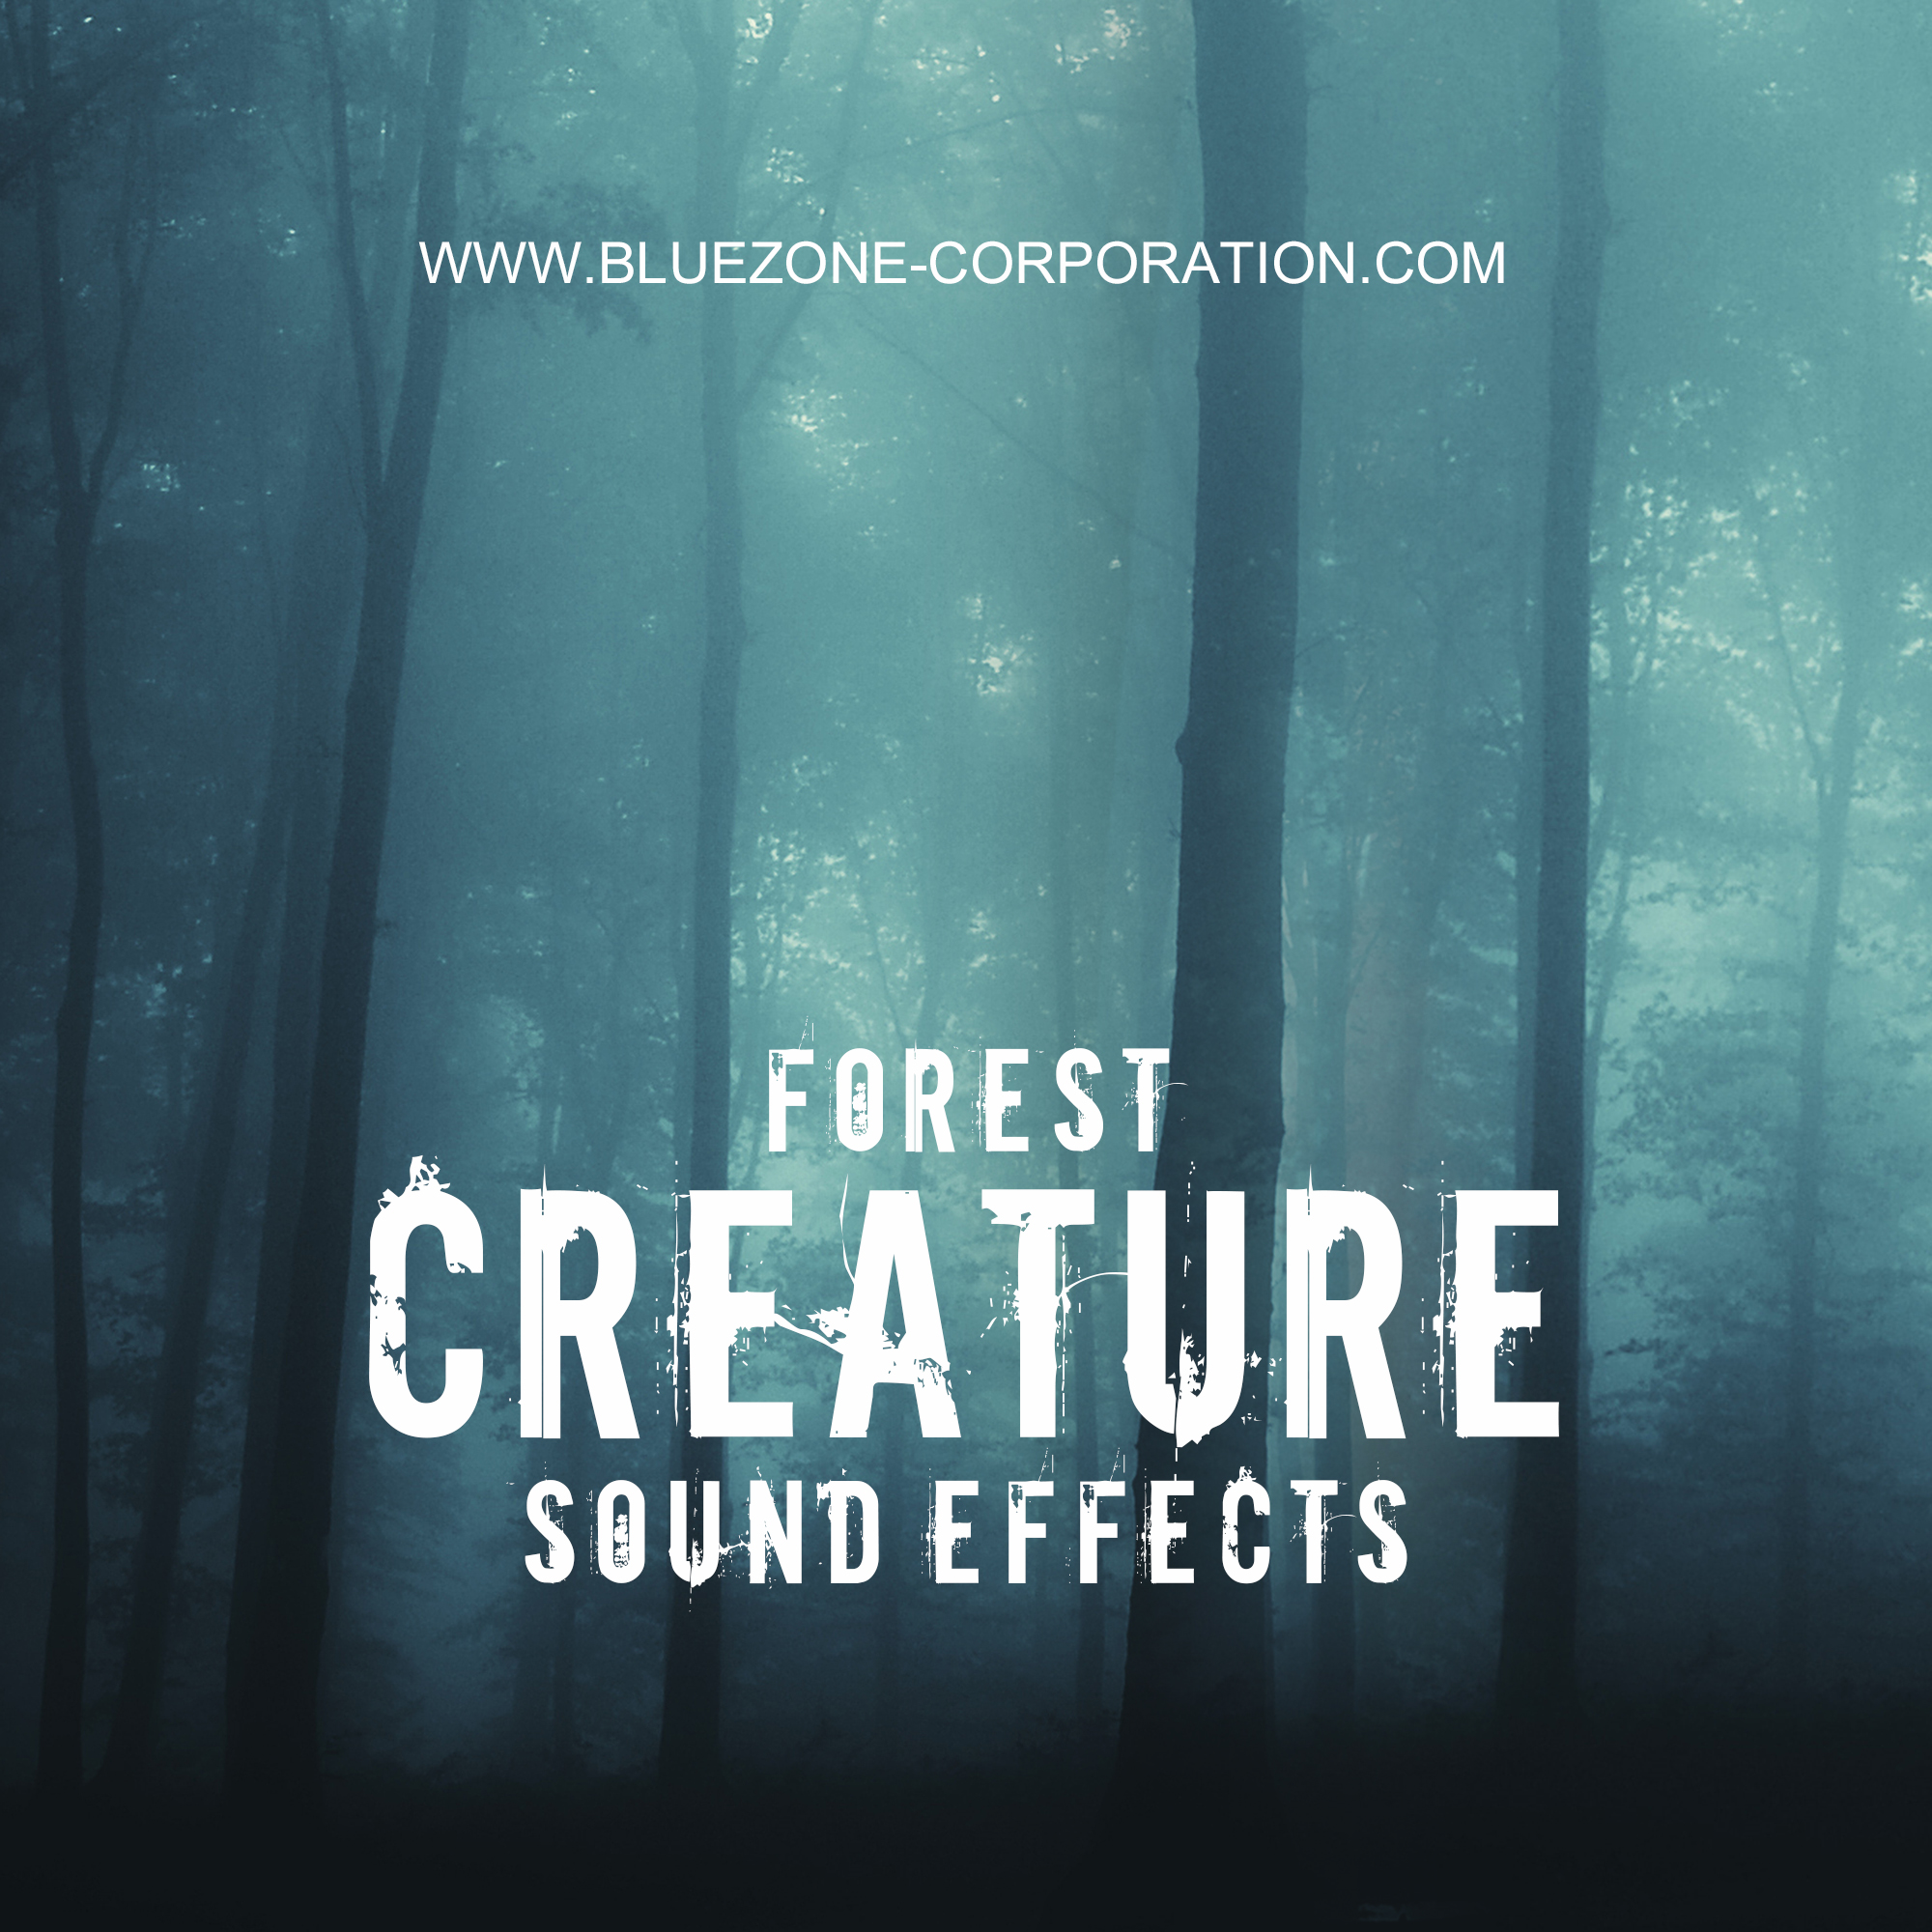 Forest Creature Sound Effects Released - Bluezone Corporation